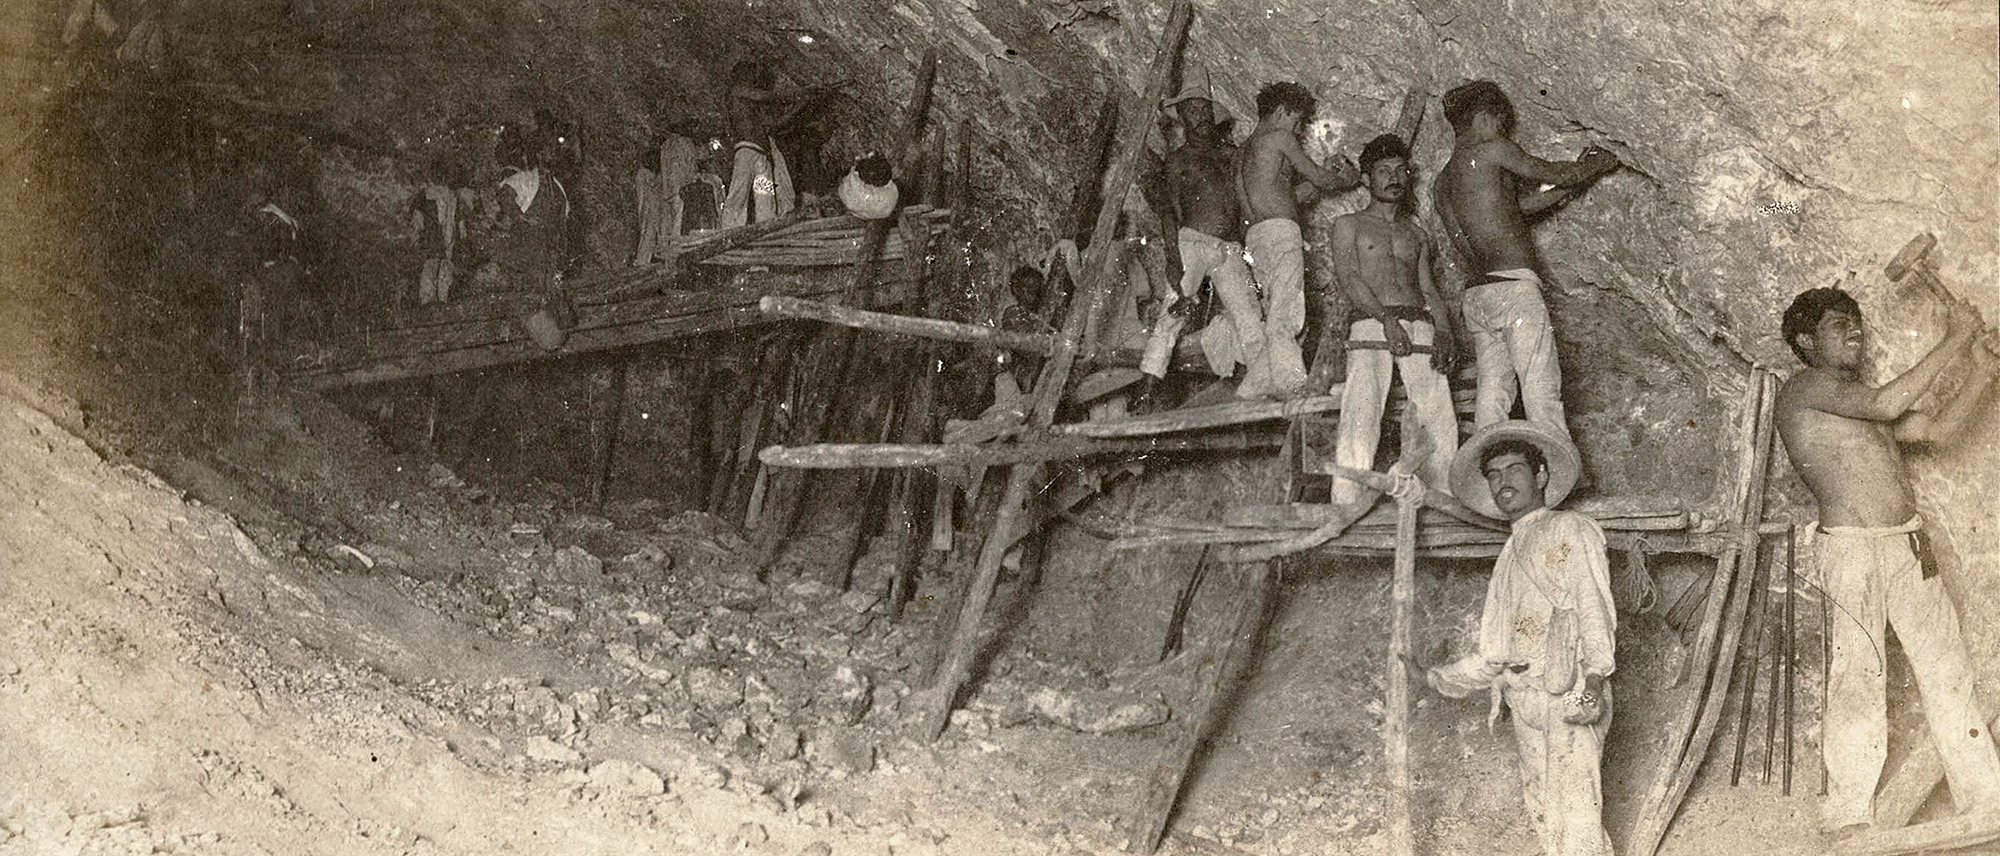 Black and white photo of men with hand tools working in a tunnel